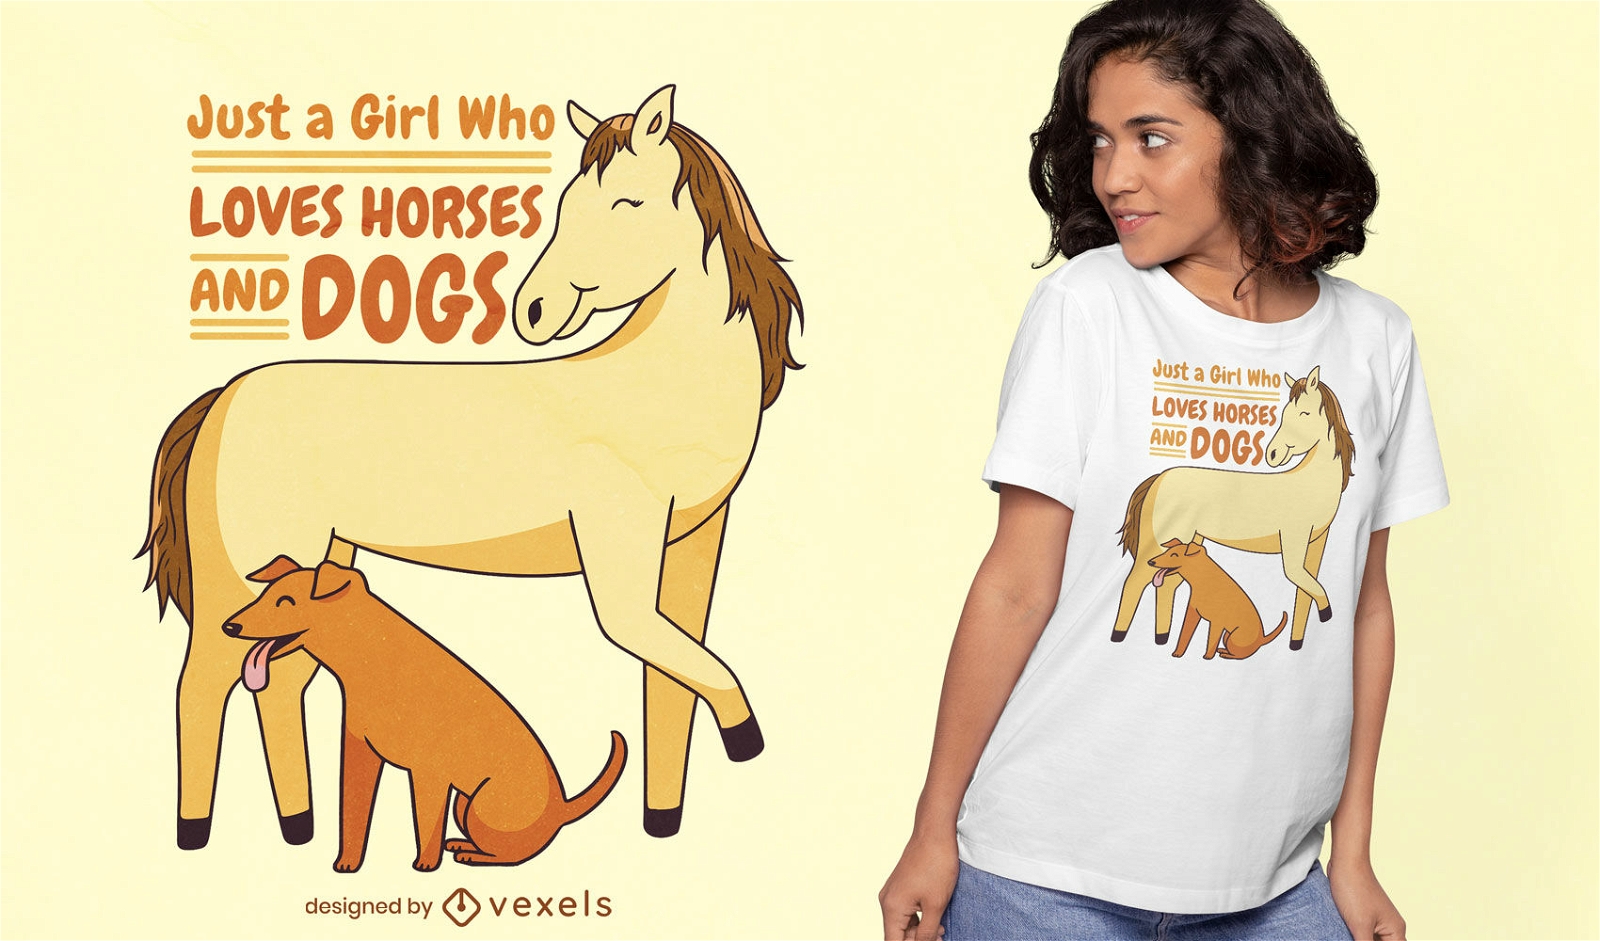 Horses and dogs lover t-shirt design